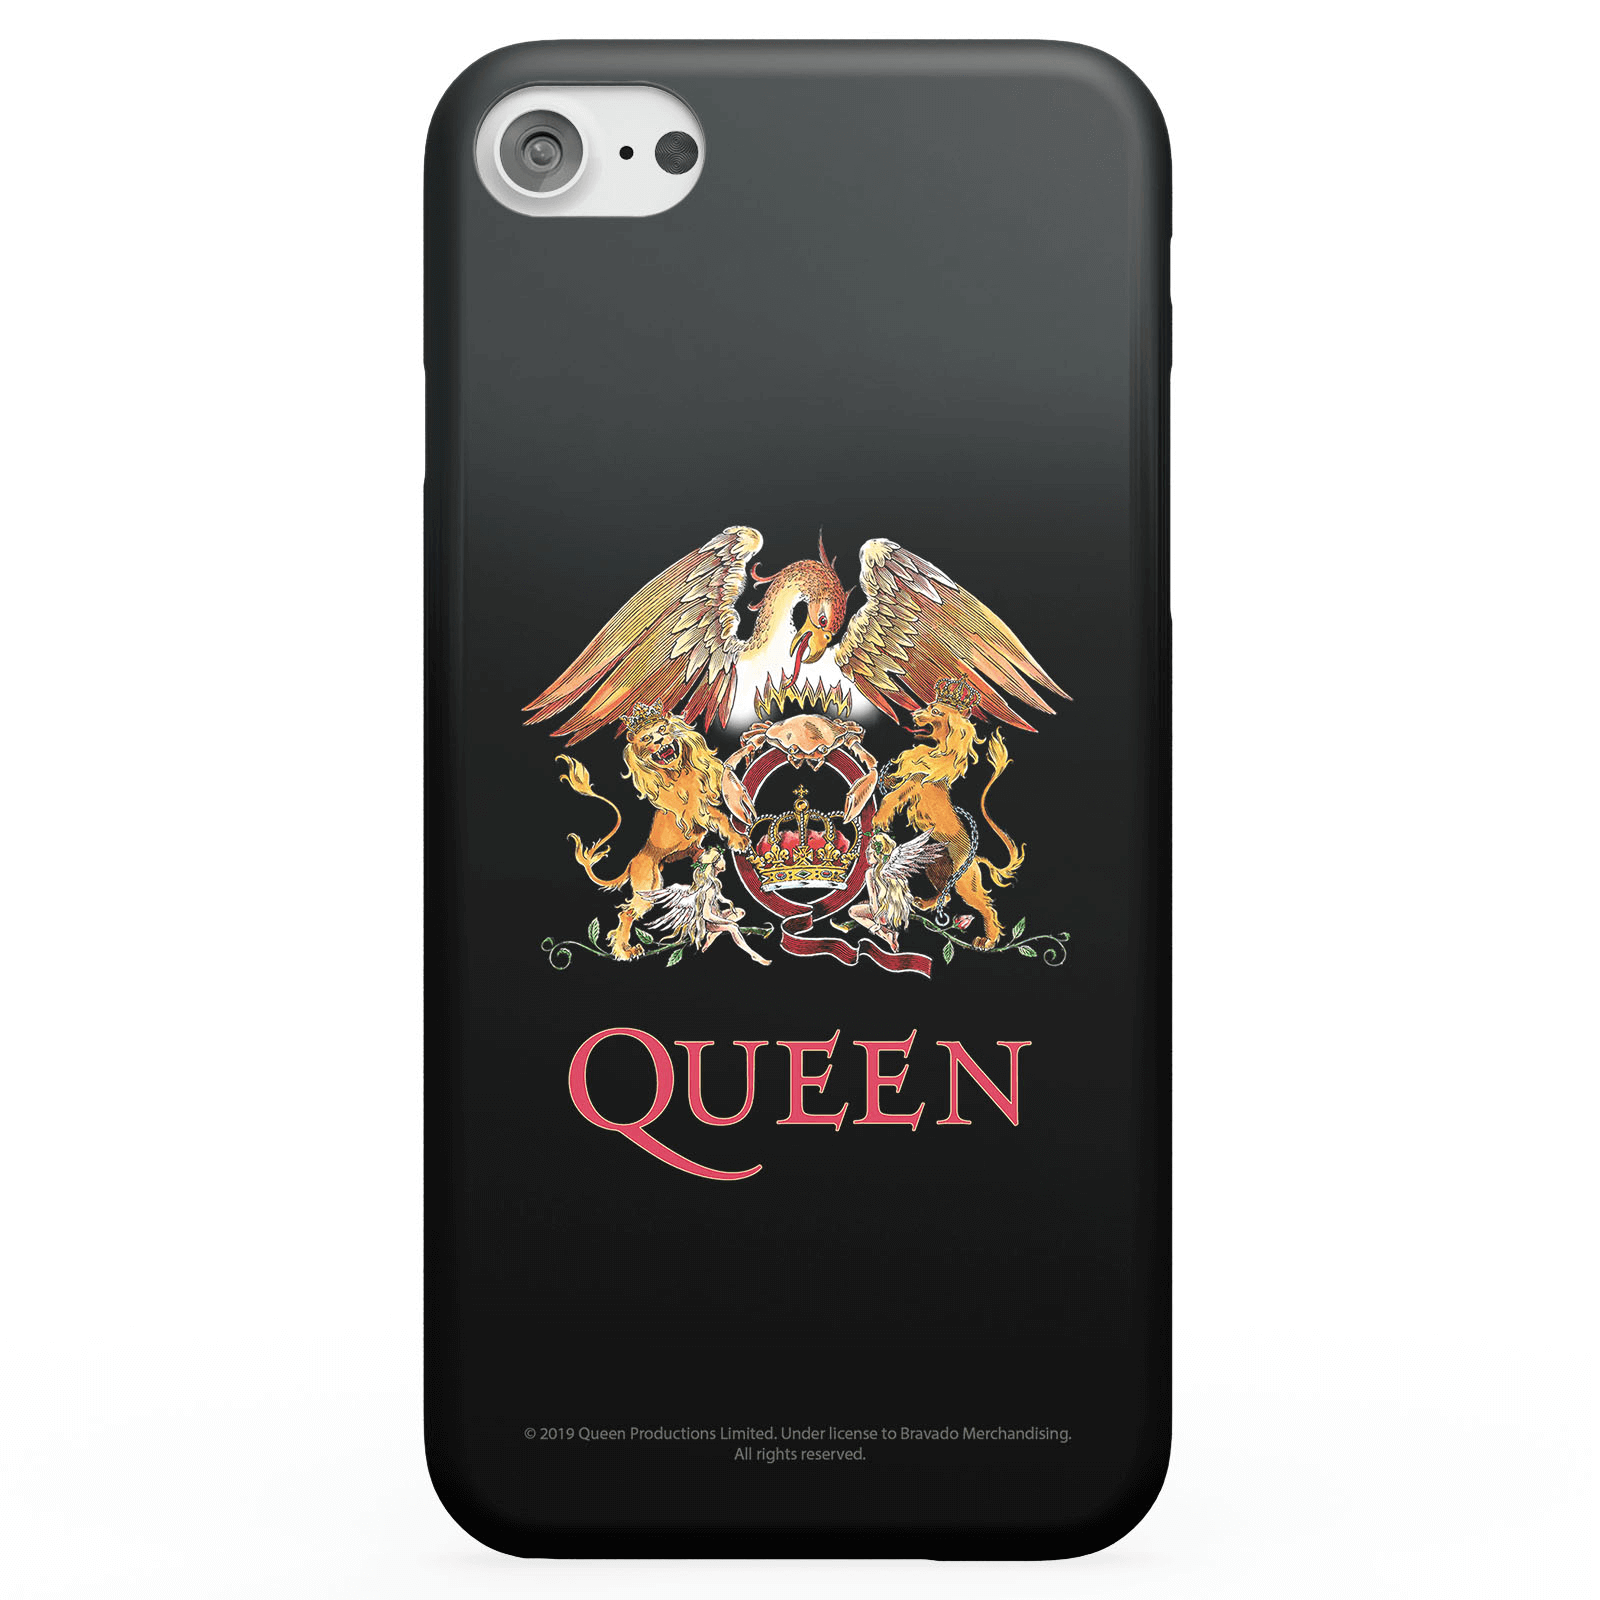 Photos - Case Crest Queen  Phone  for iPhone and Android - iPhone 5/5s - Tough   